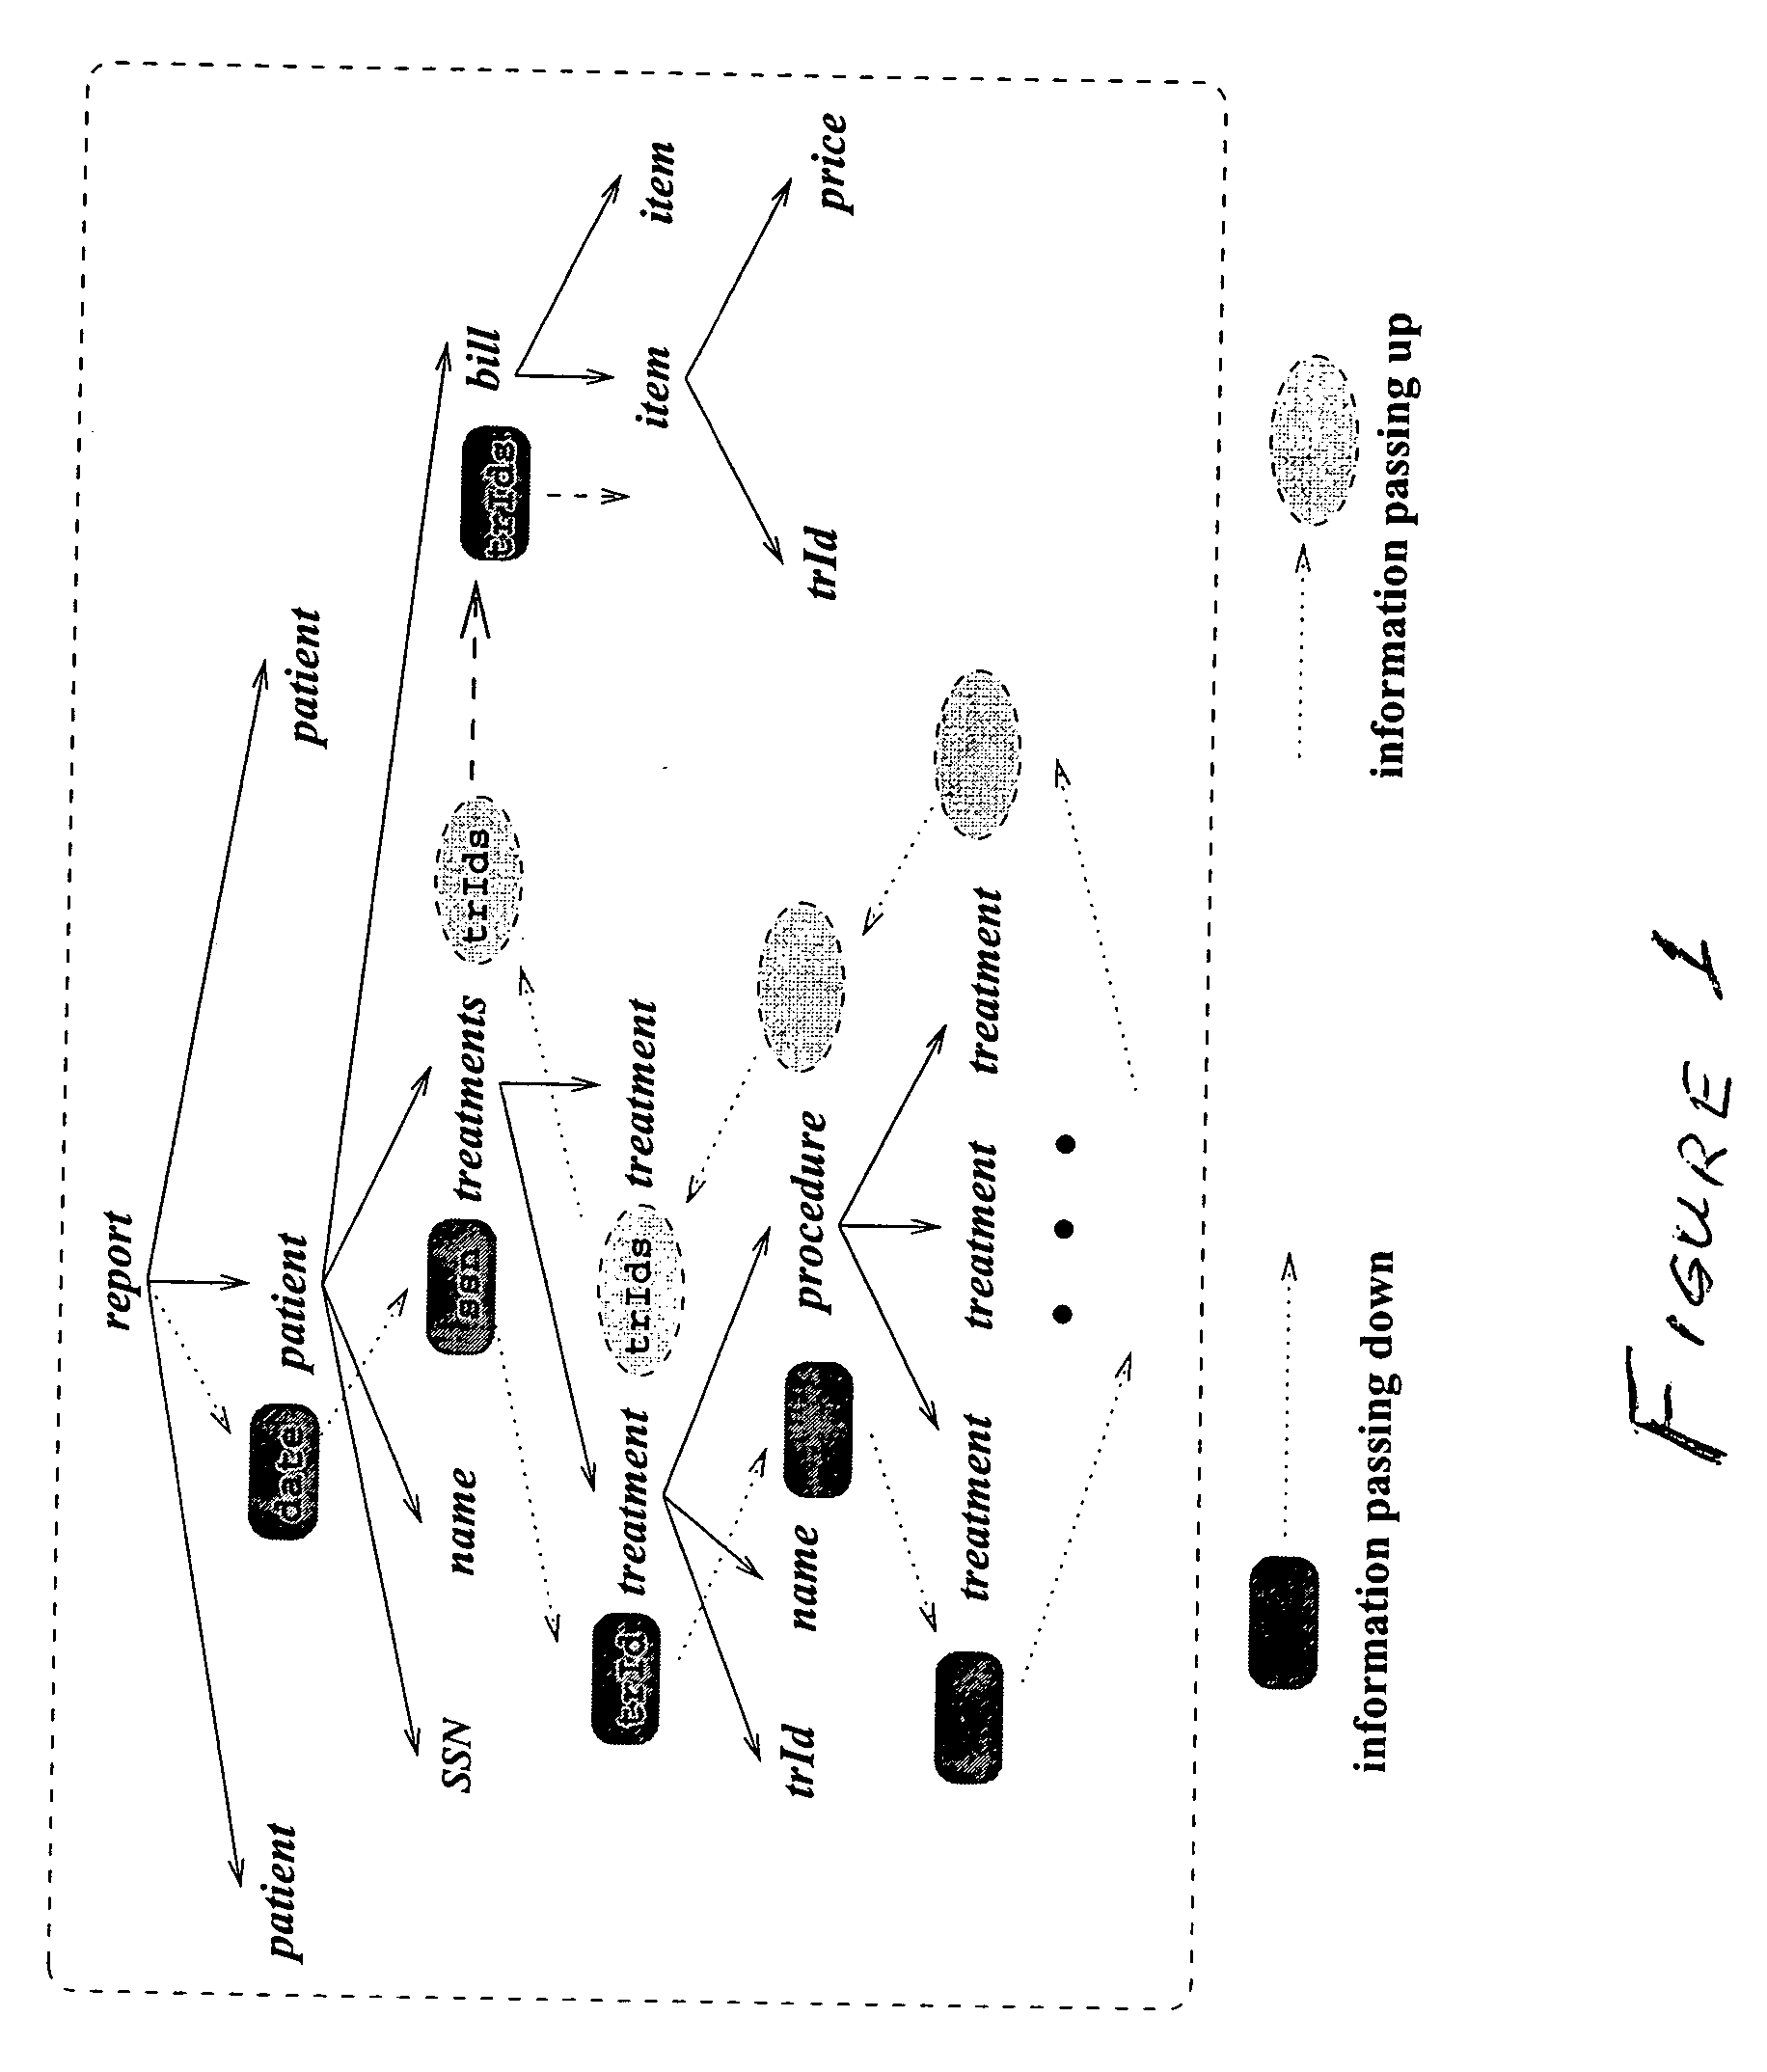 System and method for XML data integration